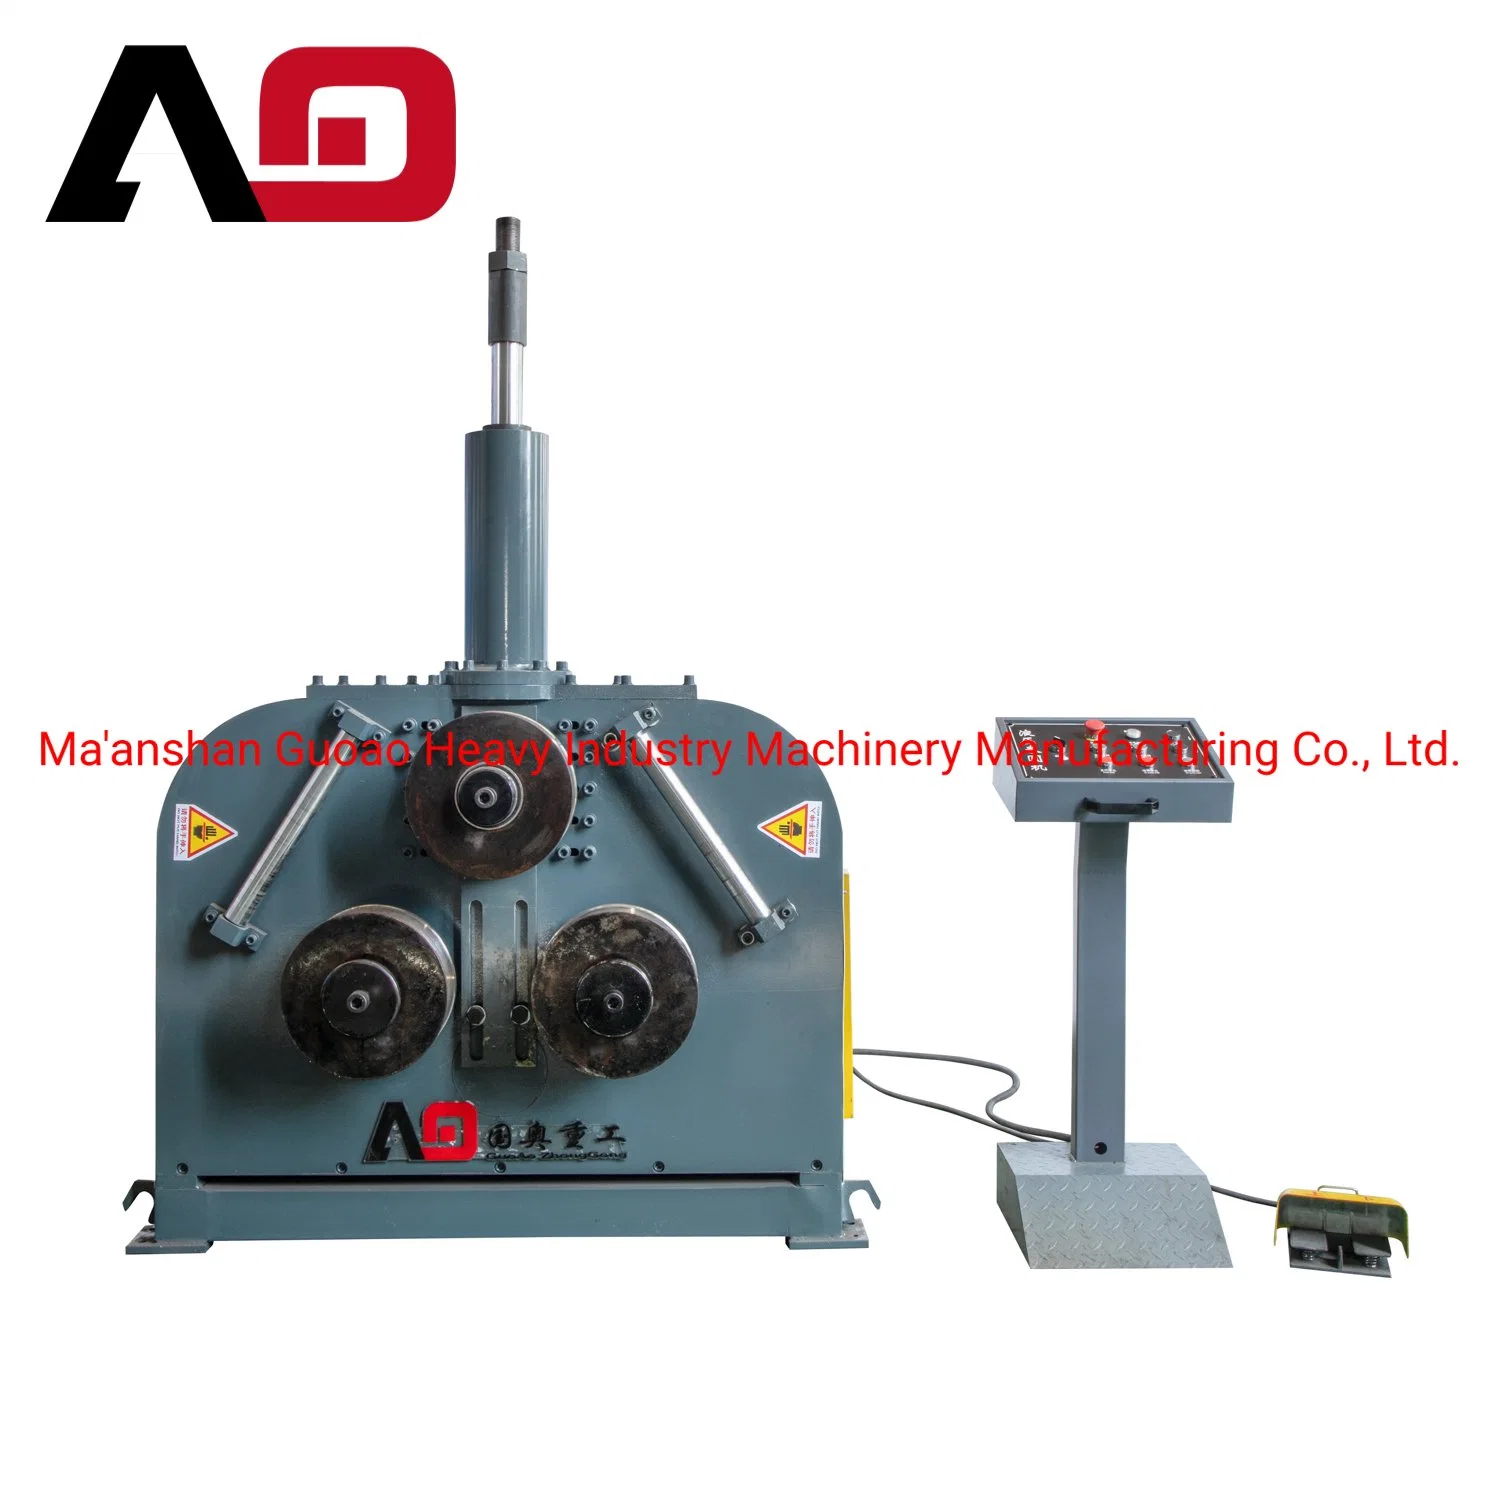 Tube Pipe Bender Machine for Conduit Bending Tools Stainless Steel Bar Aluminum Hydraulic Automatic End Forming ISO 9001: 2000